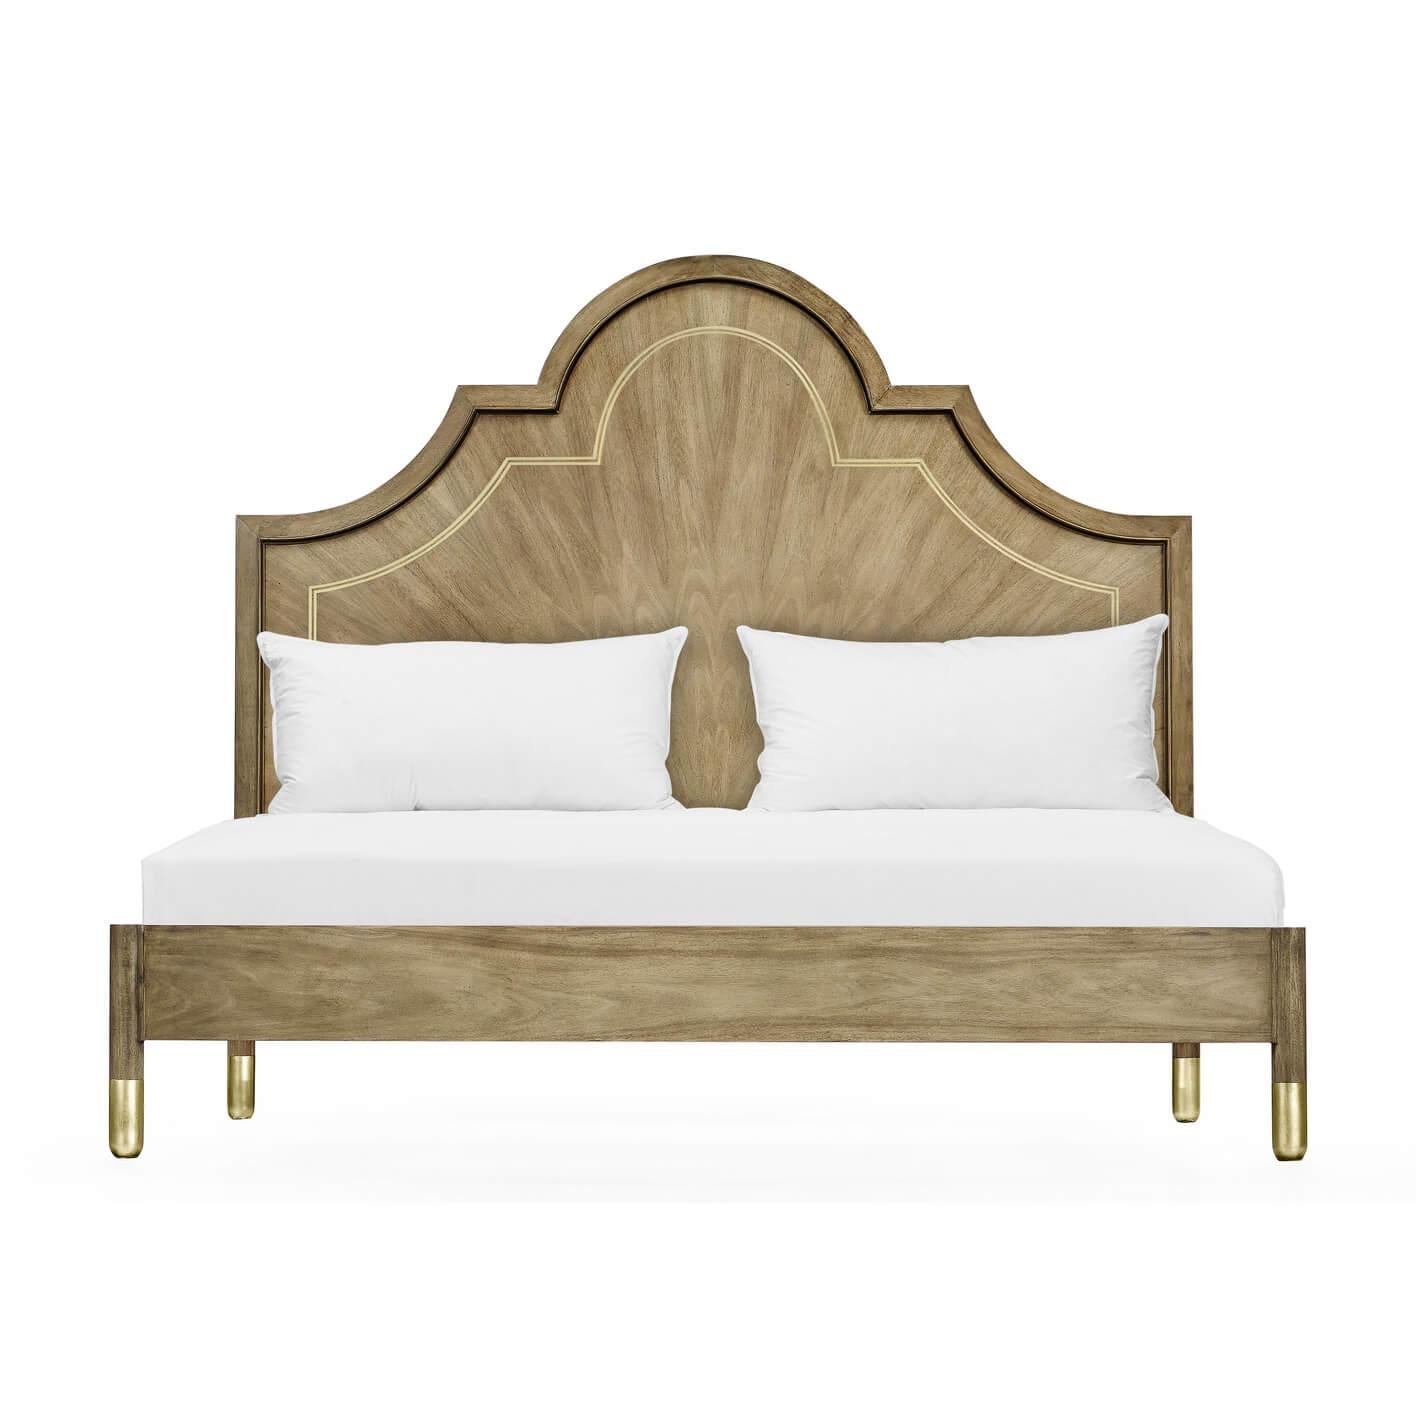 A modern walnut and brass inlaid king size bed. The arched headboard with bleached figured walnut inlaid with brass trim and raised on a walnut frame with turned legs and brass feet.

Dimensions: 81.5